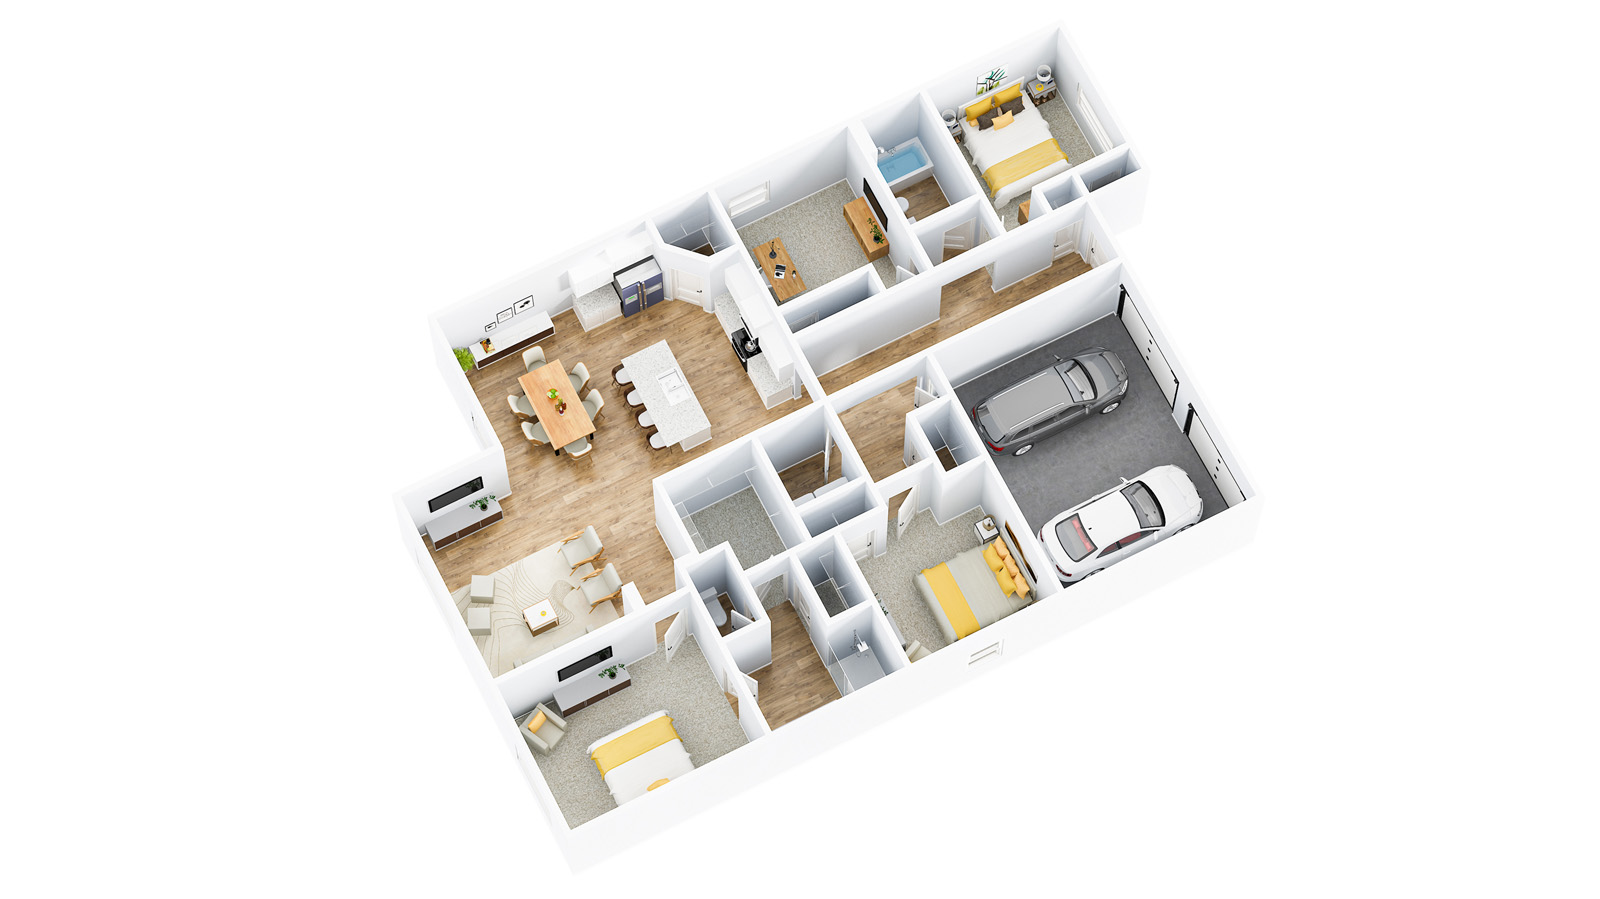 Floorplan with furniture located throughout the home